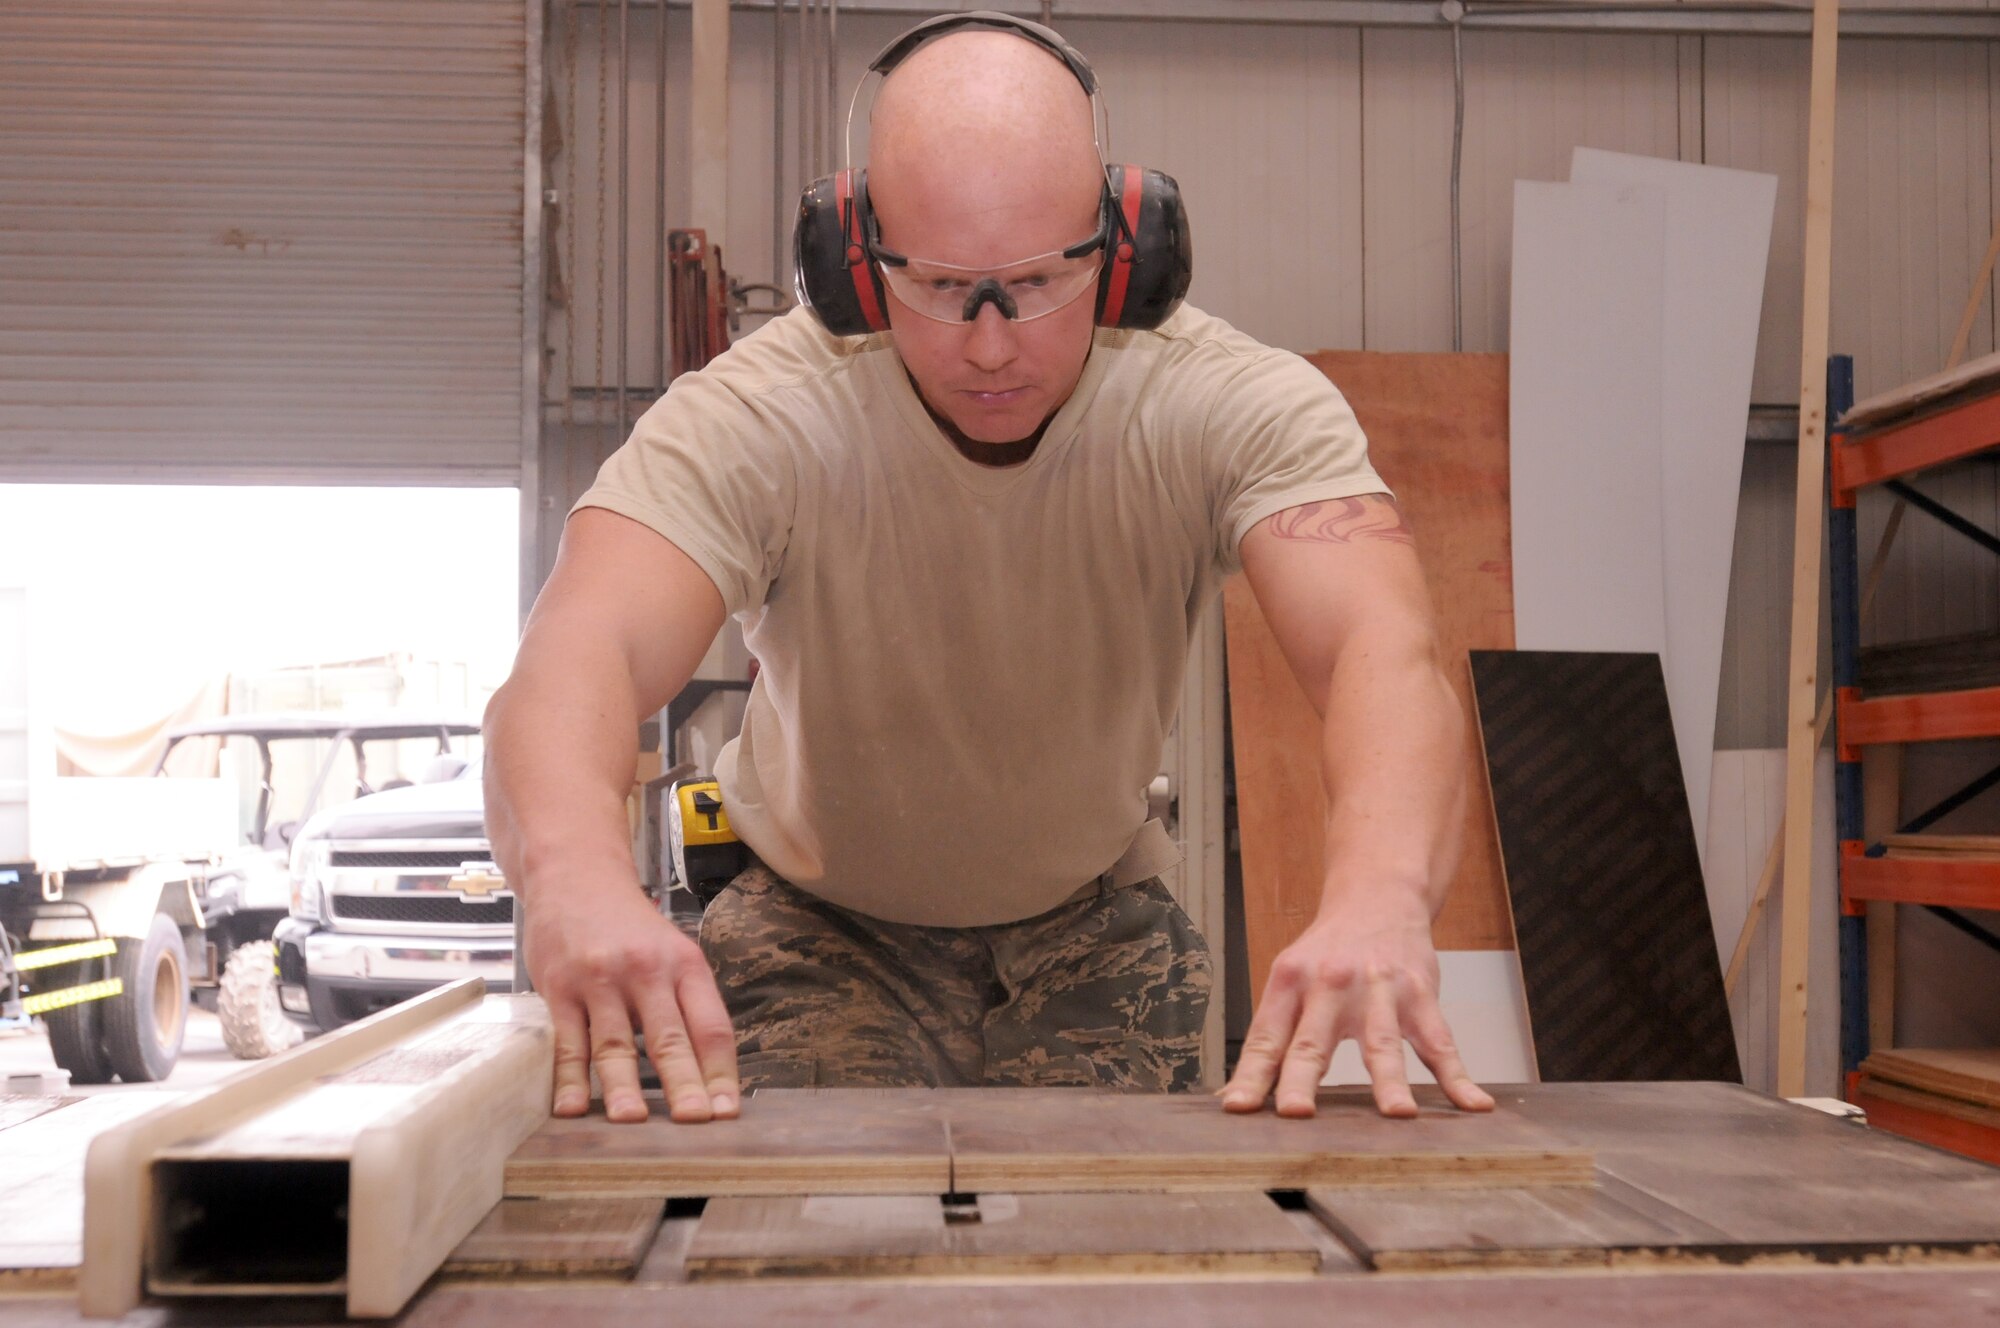 SOUTHWEST ASIA - U.S. Air Force Senior Airman Richard Klein, 380th Expeditionary Civil Engineer Squadron structural apprentice,cuts a piece of wood for a project Nov. 21, 2012.The 380th ECES structures shop is responsible for maintaining the operability and security of 380th AEW facilities, as well as performing renovations and construction projects within some of the facilities. (U.S. Air Force photo/Tech. Sgt. Amanda Savannah)